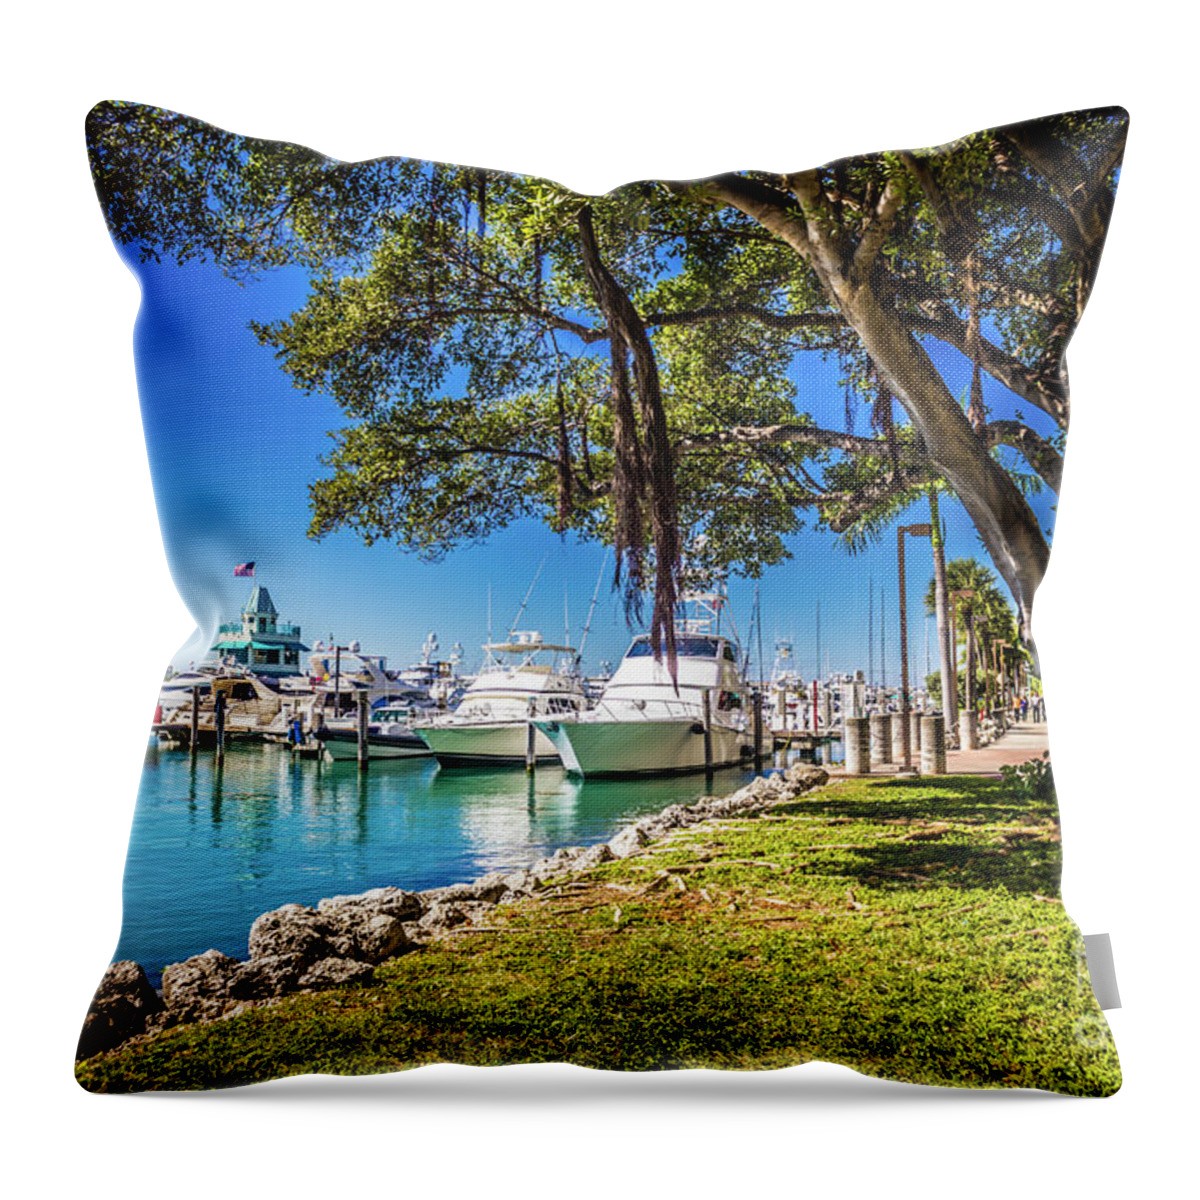 Luxury Yachts Artwork Throw Pillow featuring the photograph Luxury Yachts Artwork 4526 by Carlos Diaz